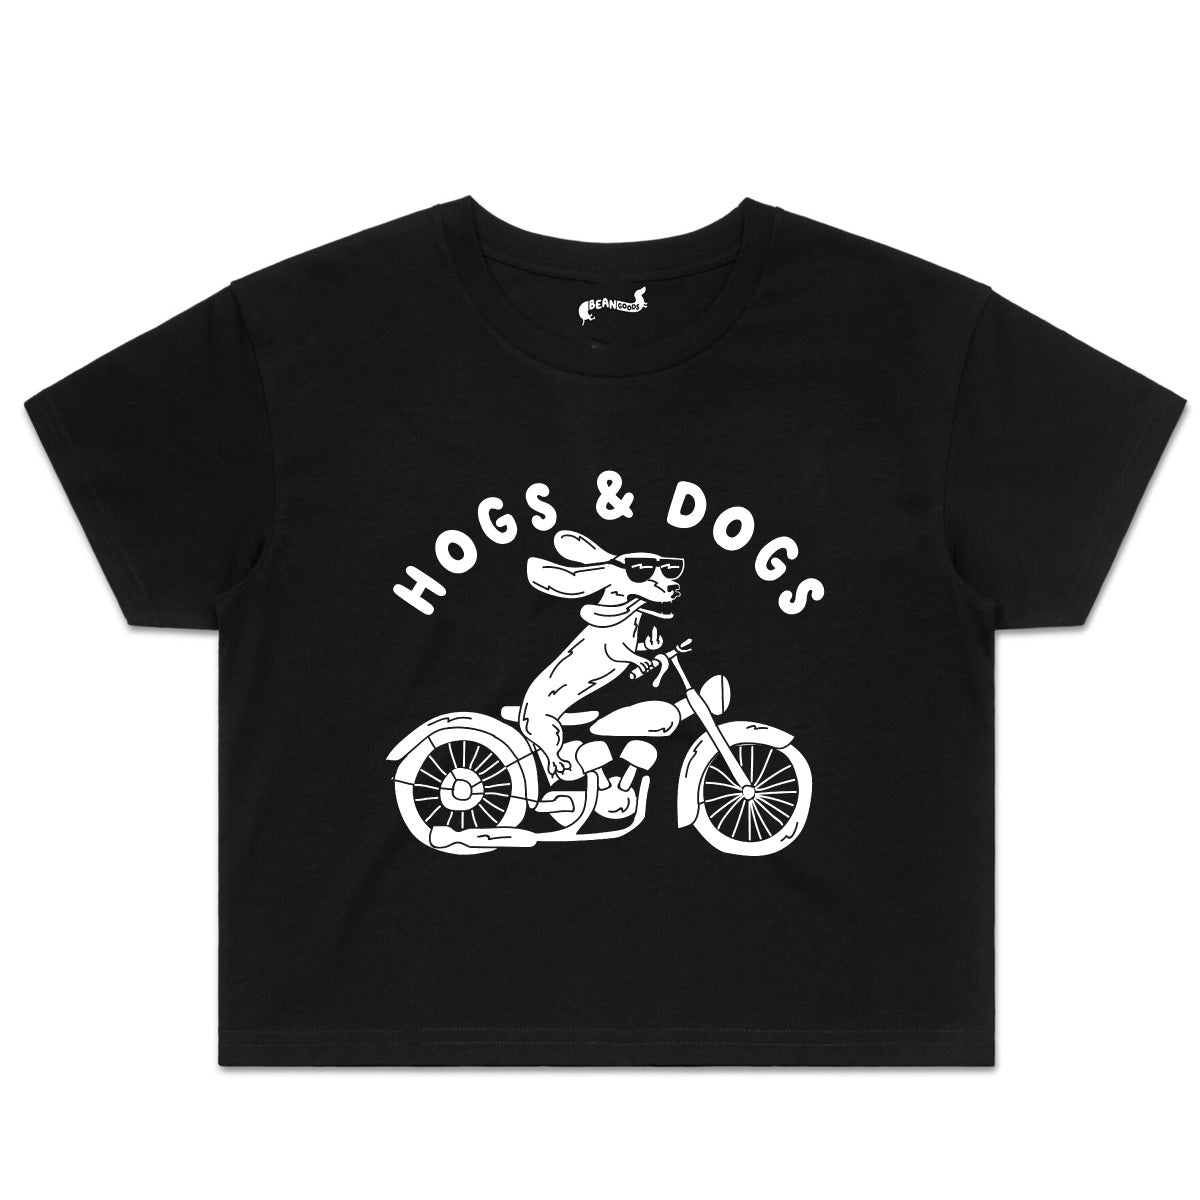 hogs & dogs cropped tee - bean goods